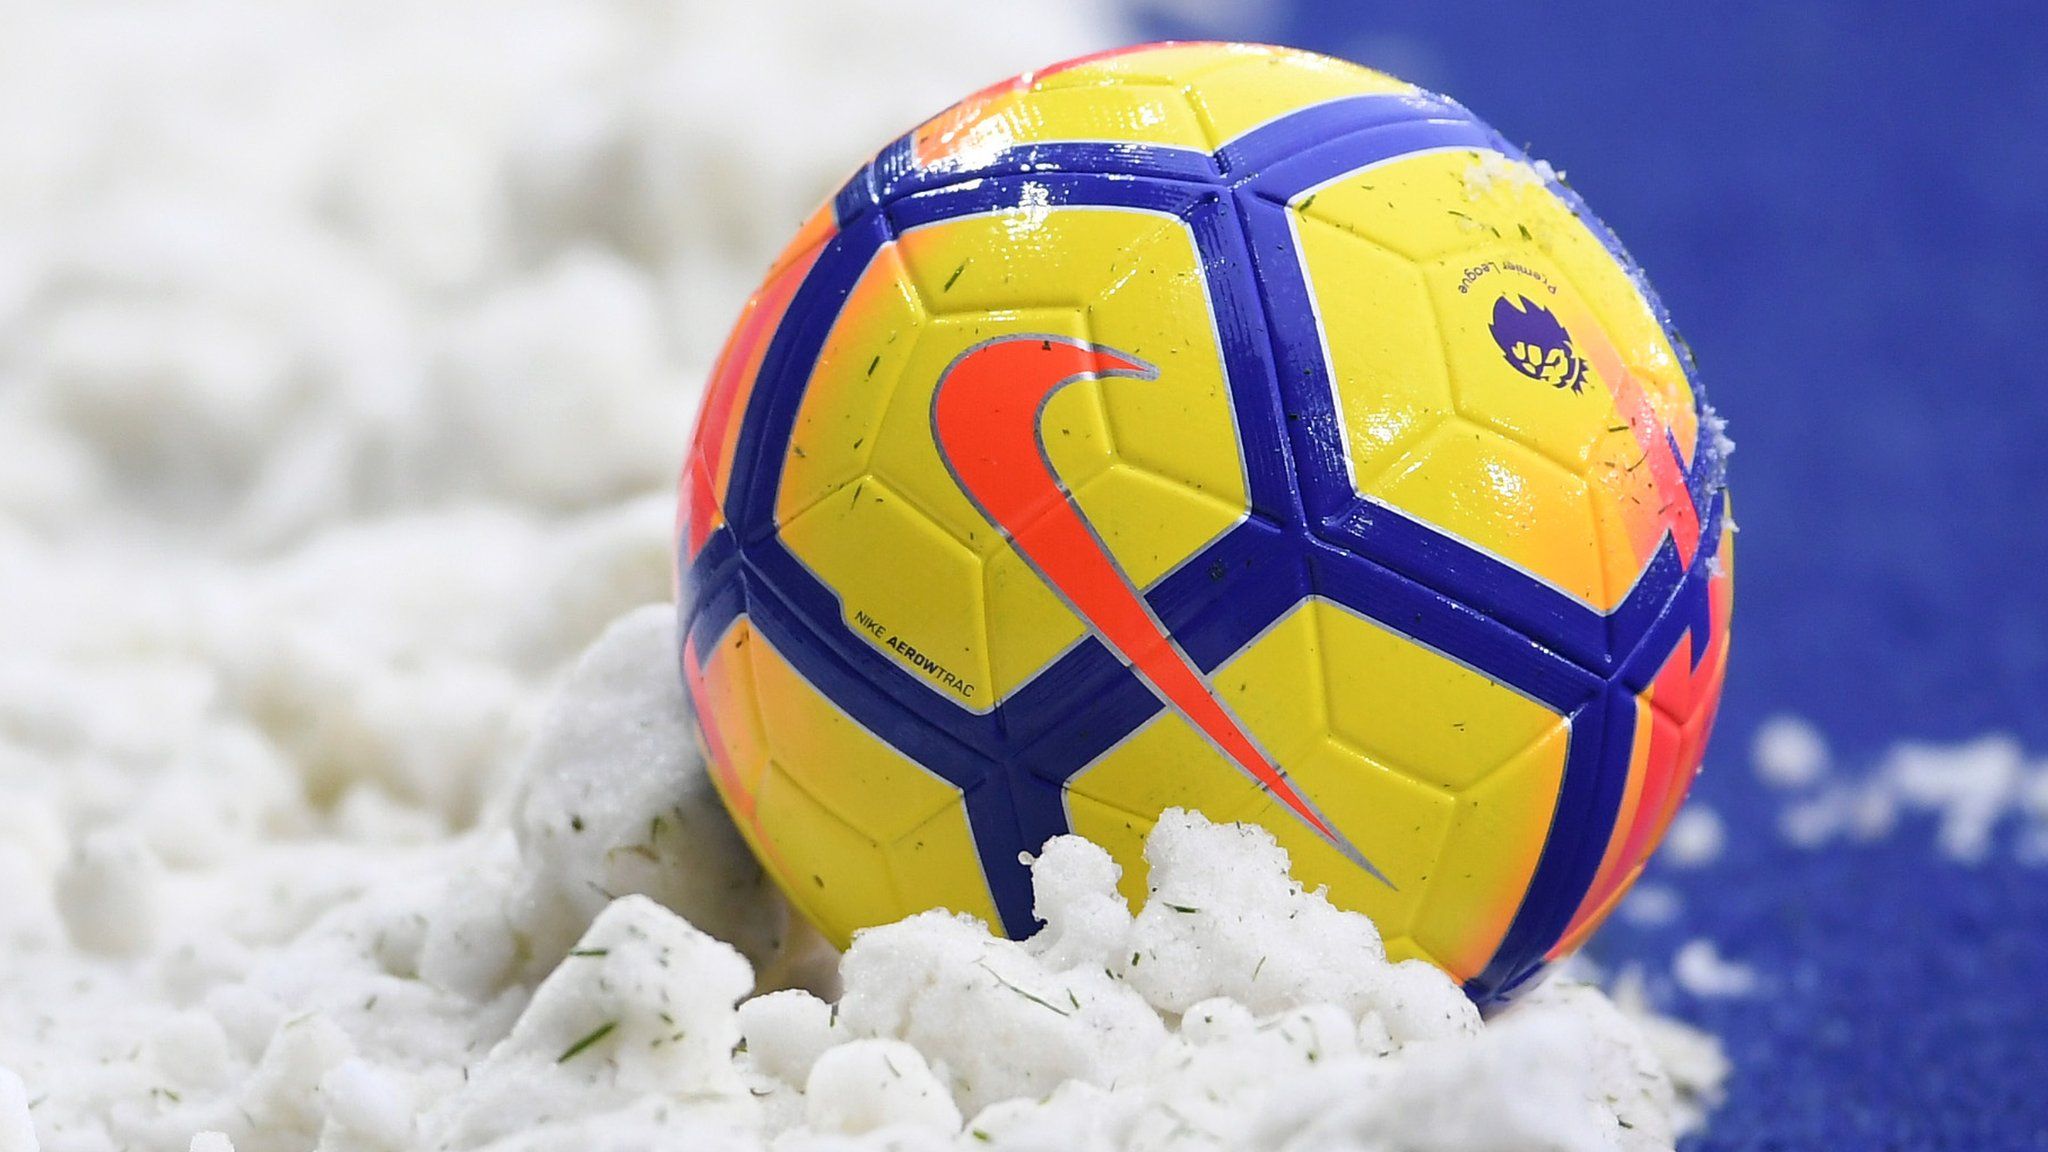 A Premier League ball surrounded by snow during the winter